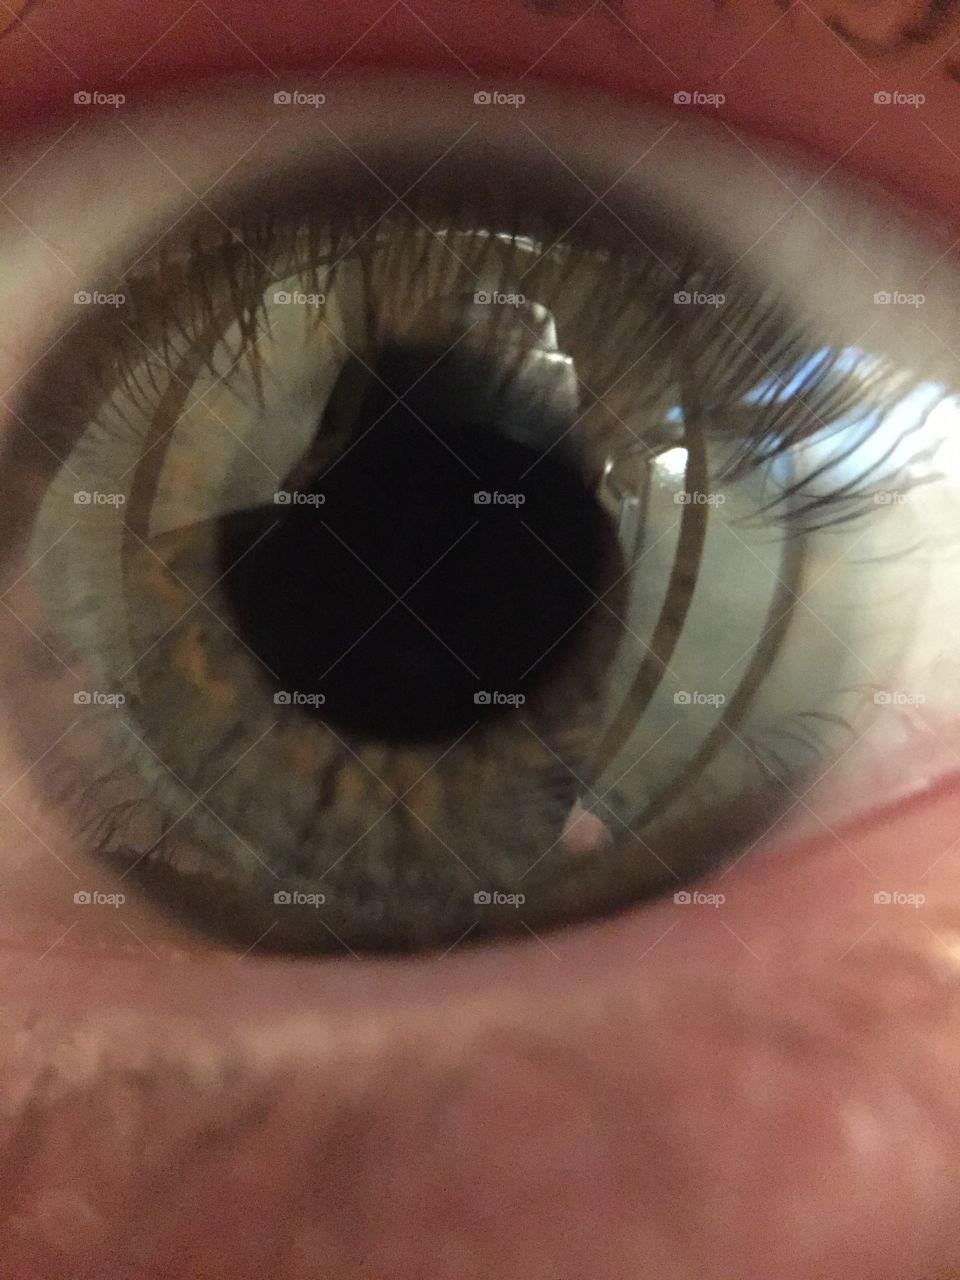 The window to the soul